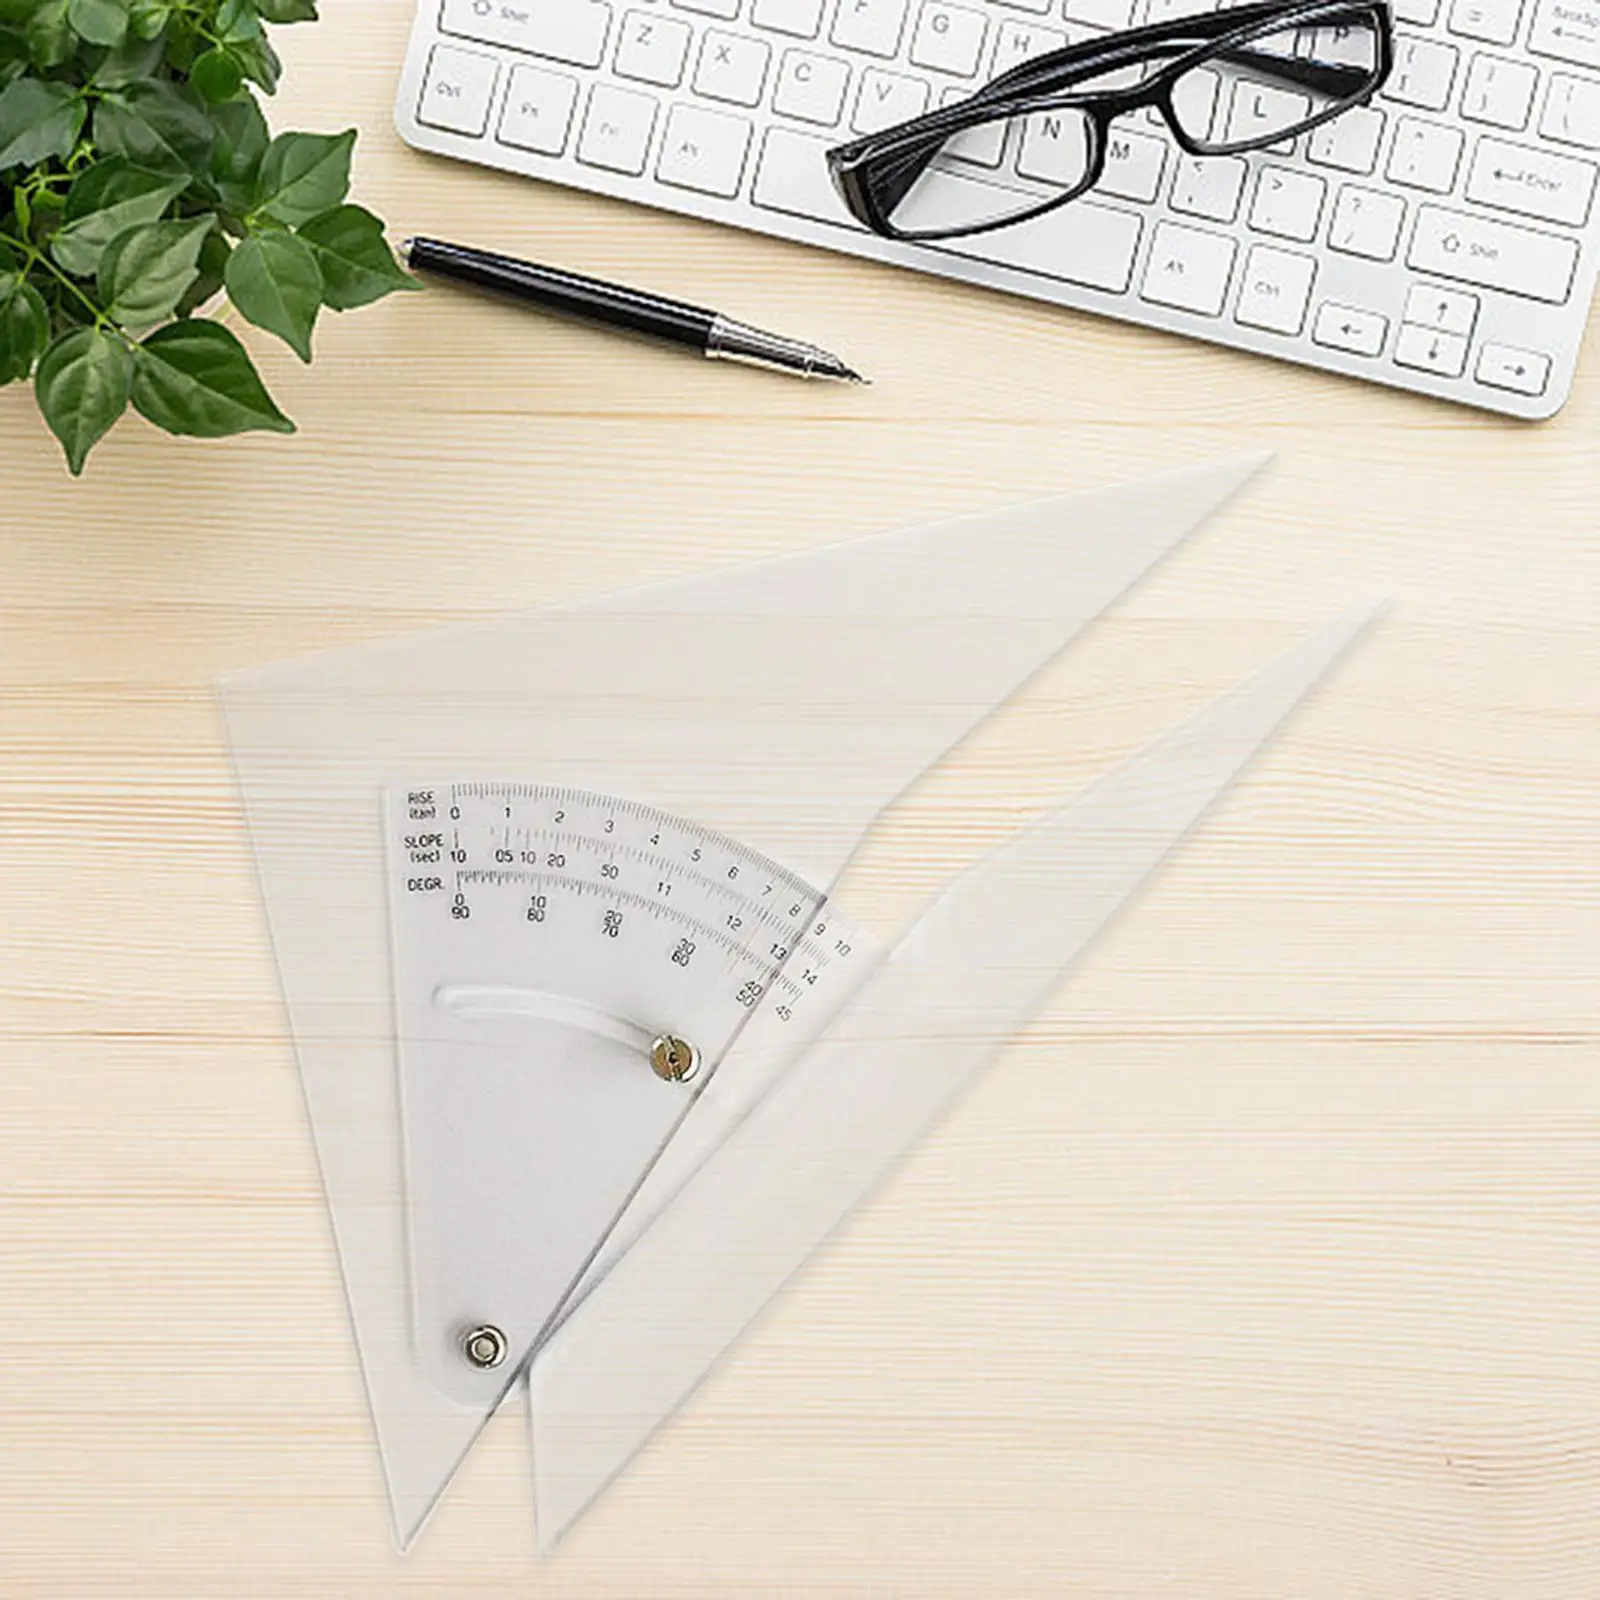 Adjustable Drafting Triangle Ruler Tool Durable Precision Adjustable Angle for Architect Drawing Professional Sketching Supplies